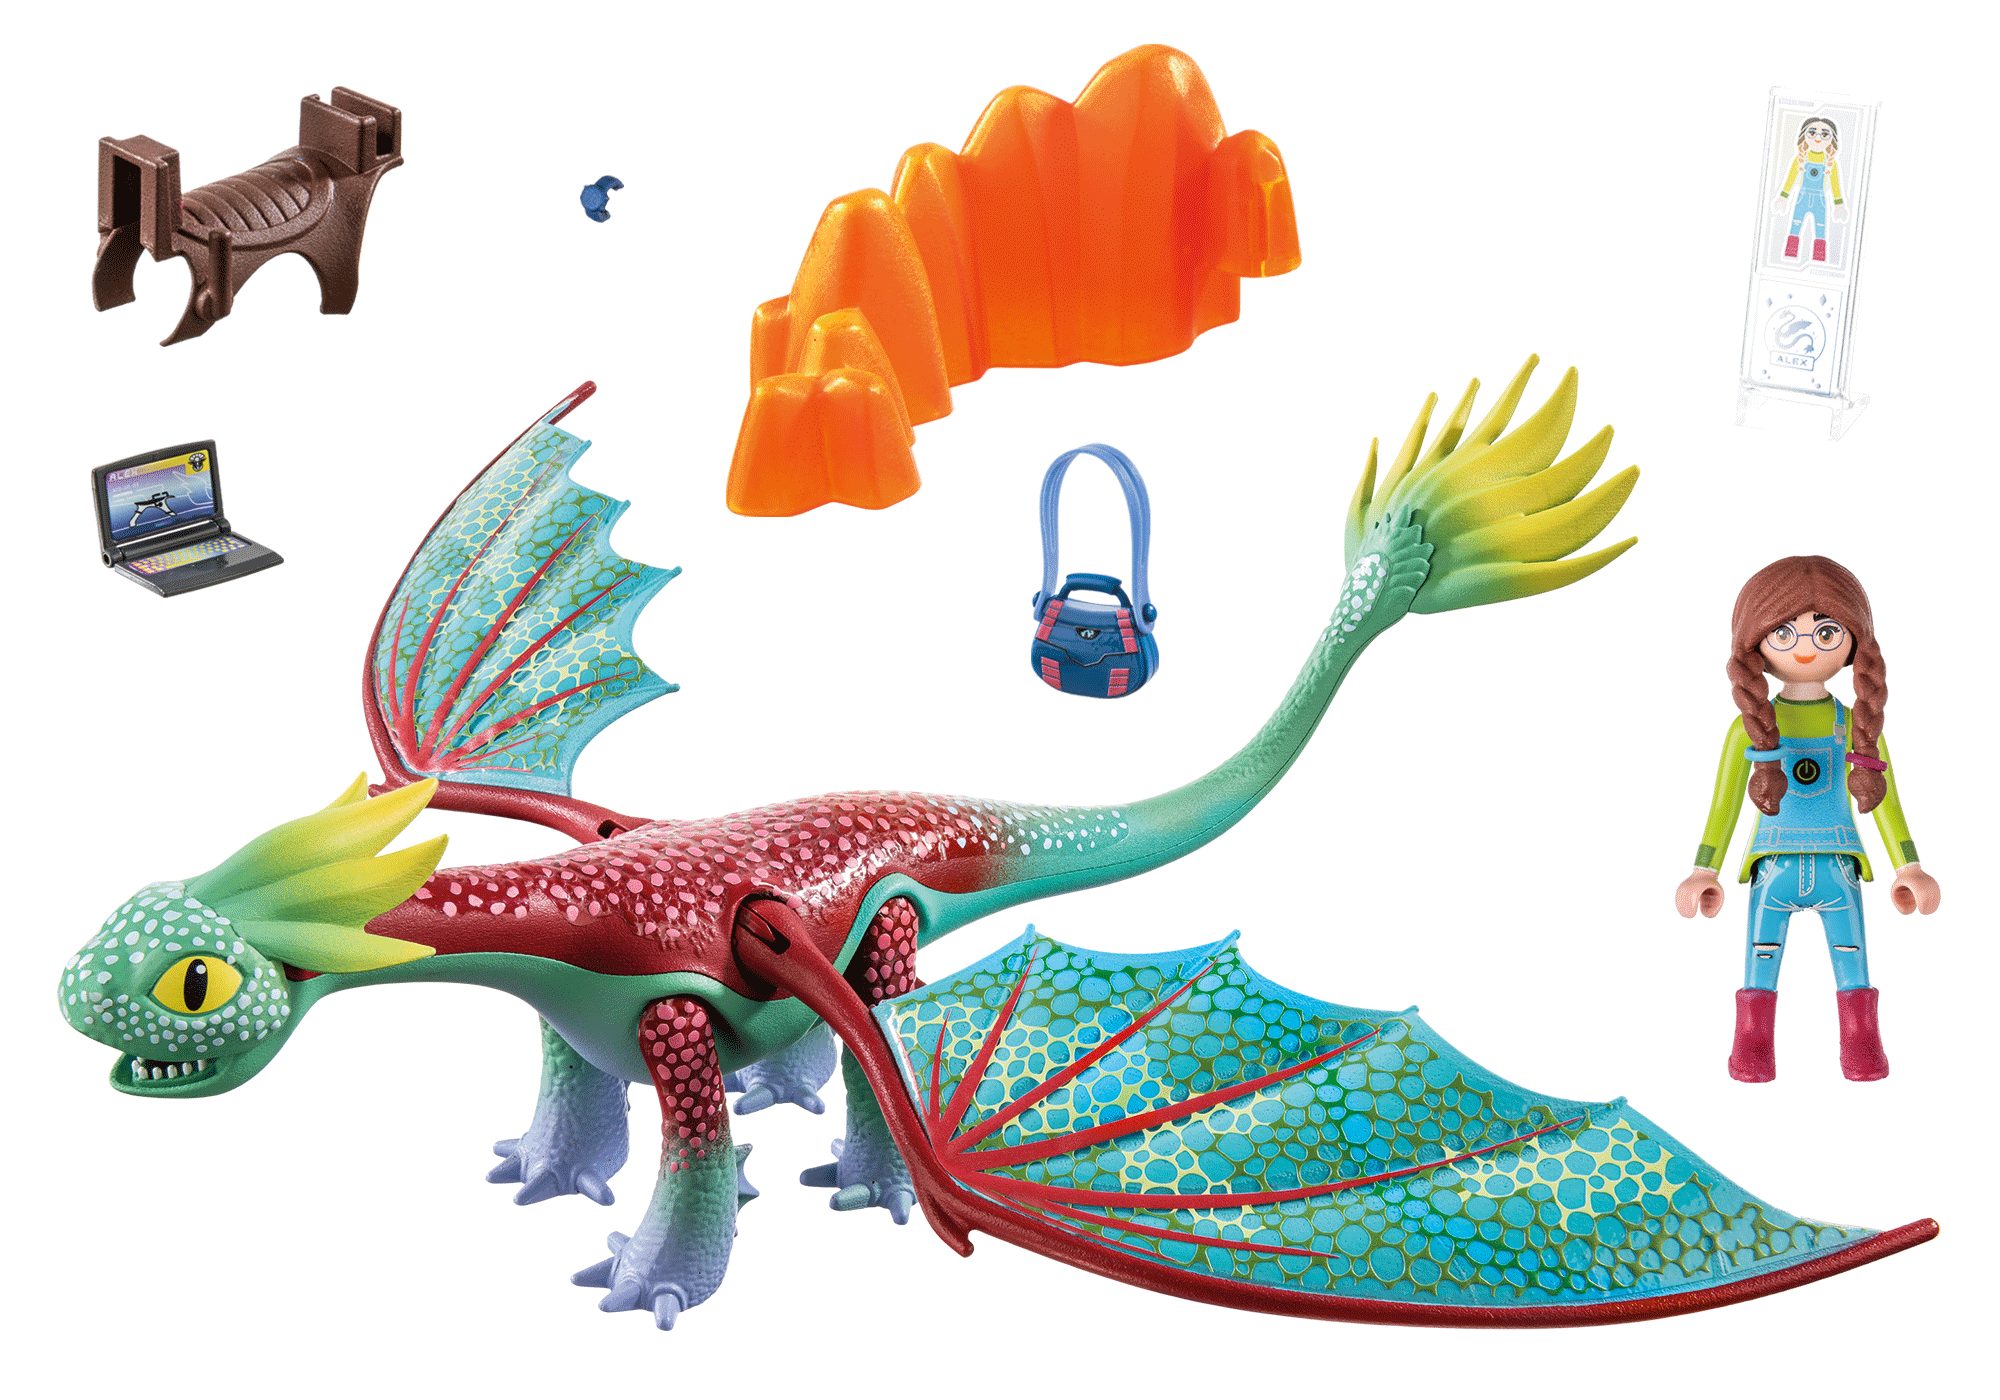 PLAYMOBIL 71083 Dragons: Mehrfarbig - Feathers The Alex Spielset, & Nine Realms